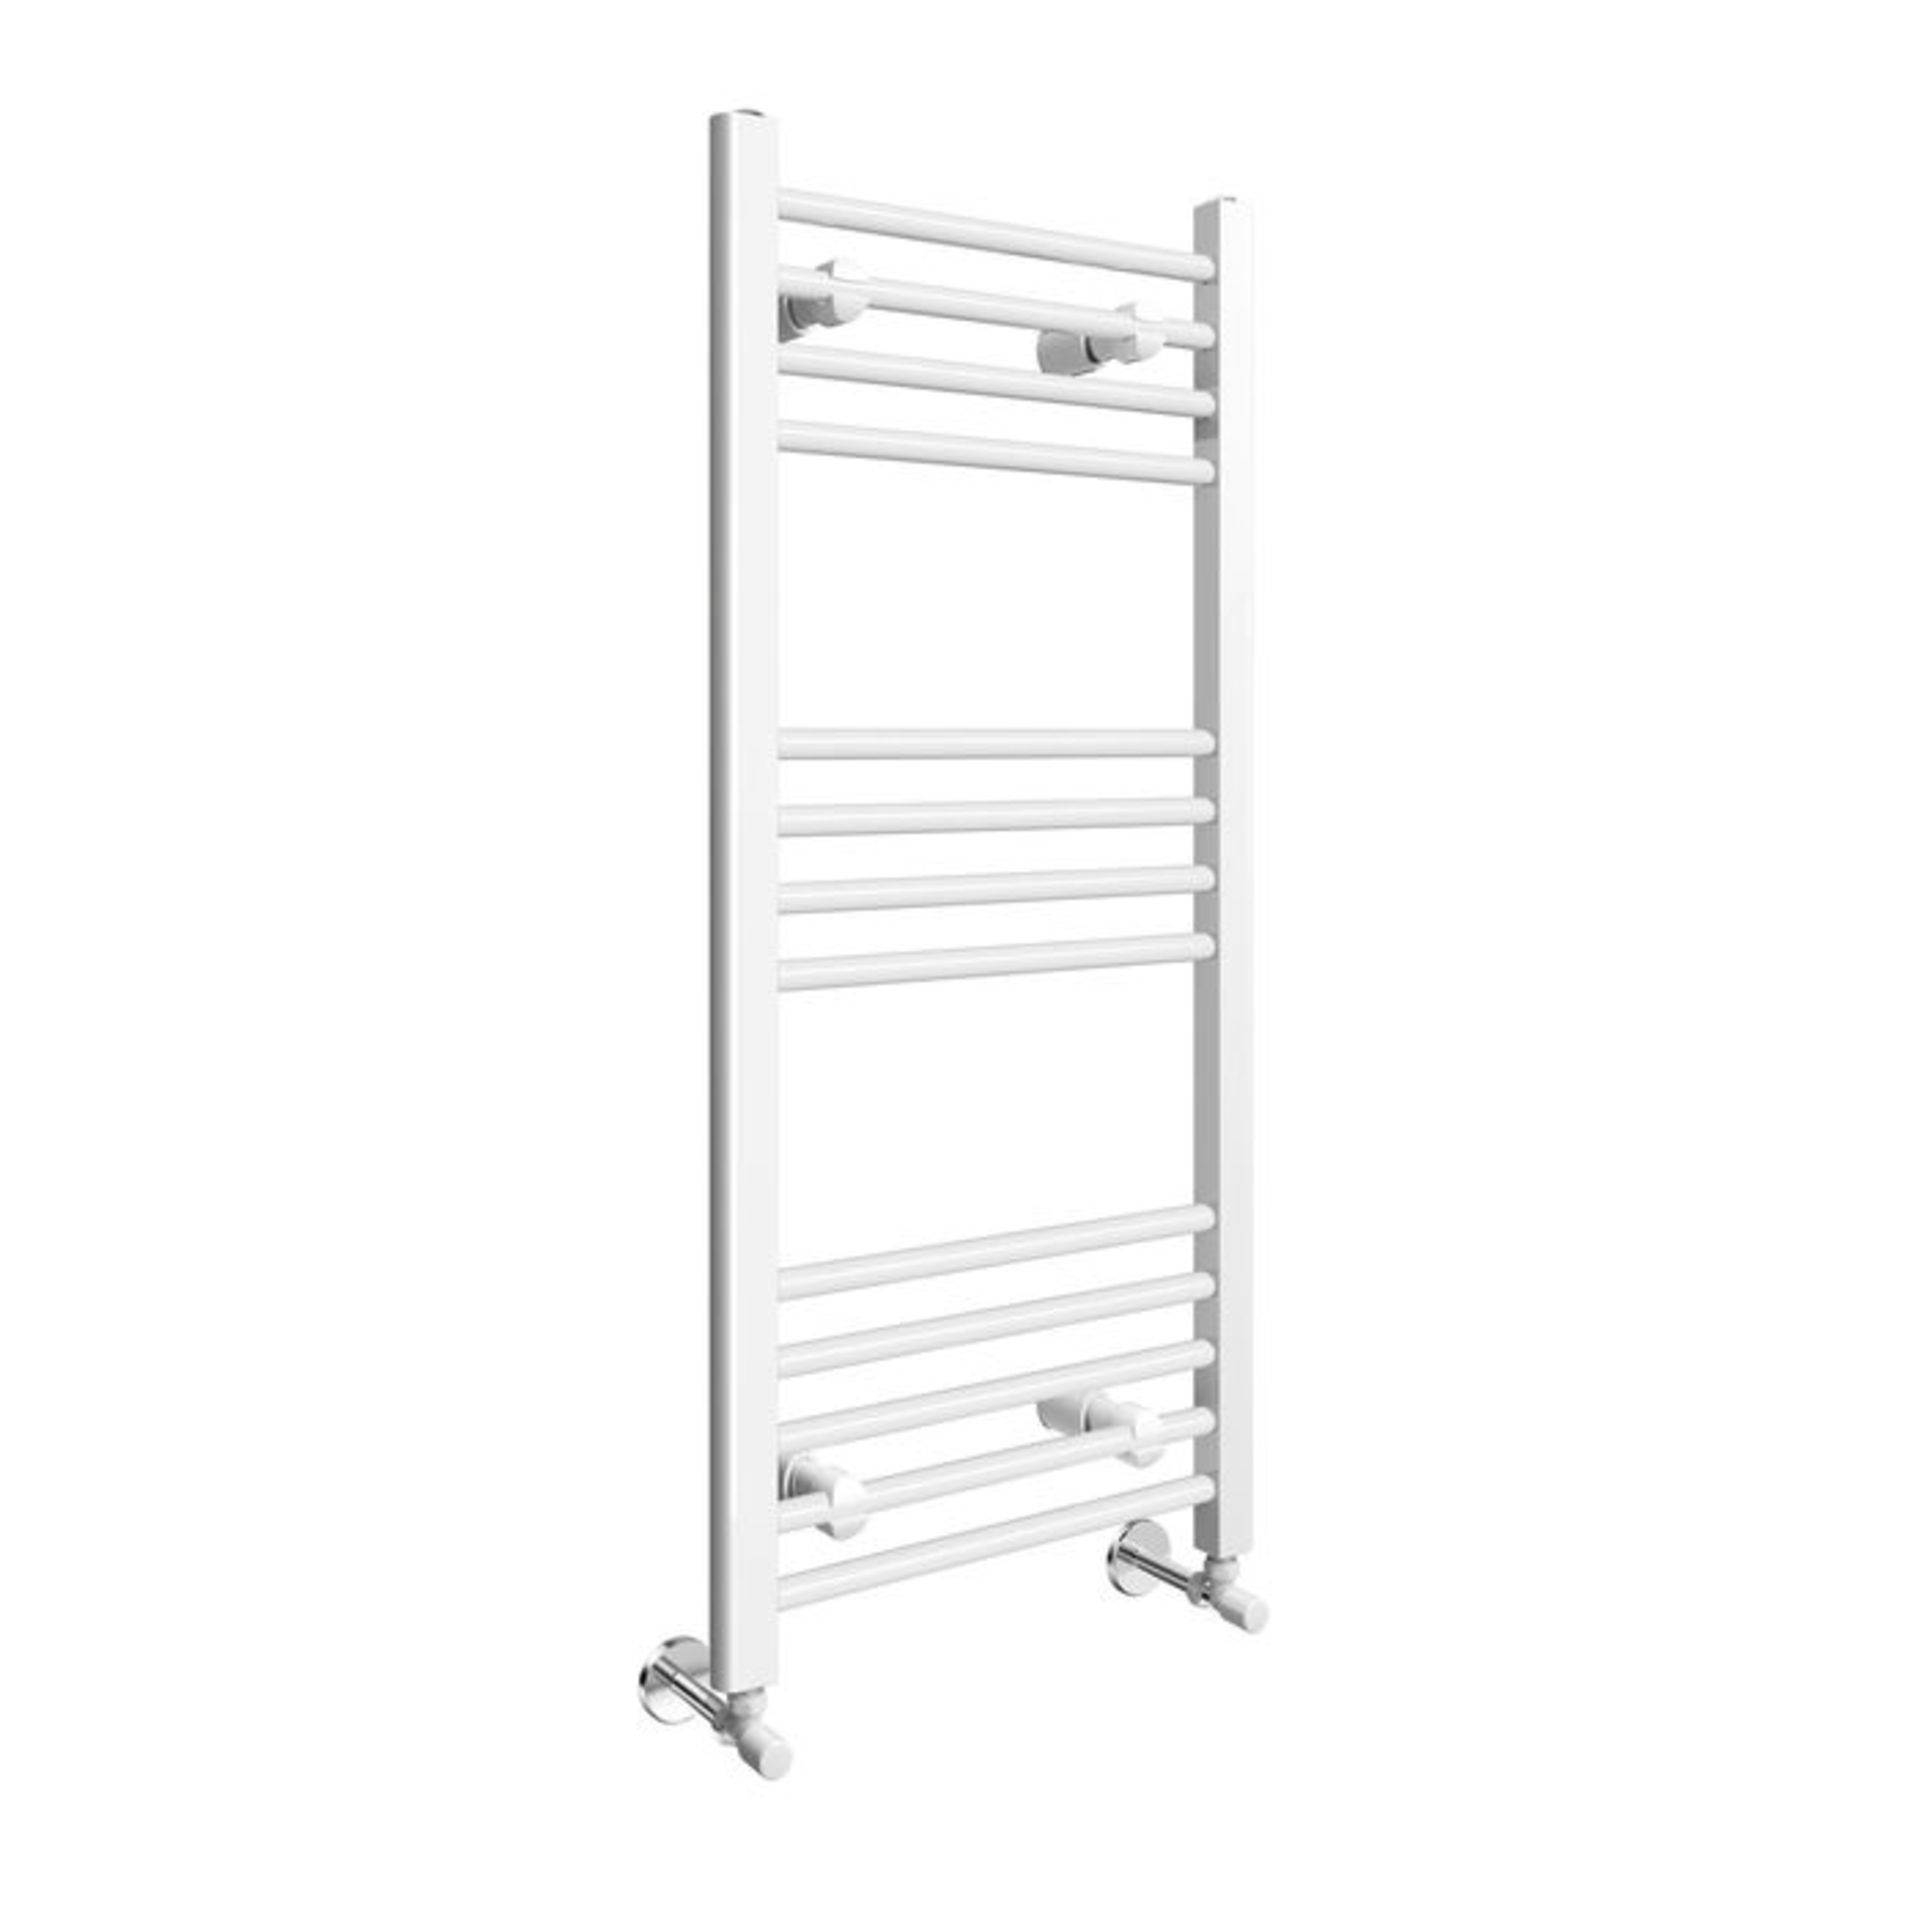 NEW (TT120) 800x450mm White Straight Rail Ladder Towel Radiator.RRP £249.99.Made from low carb... - Image 3 of 3